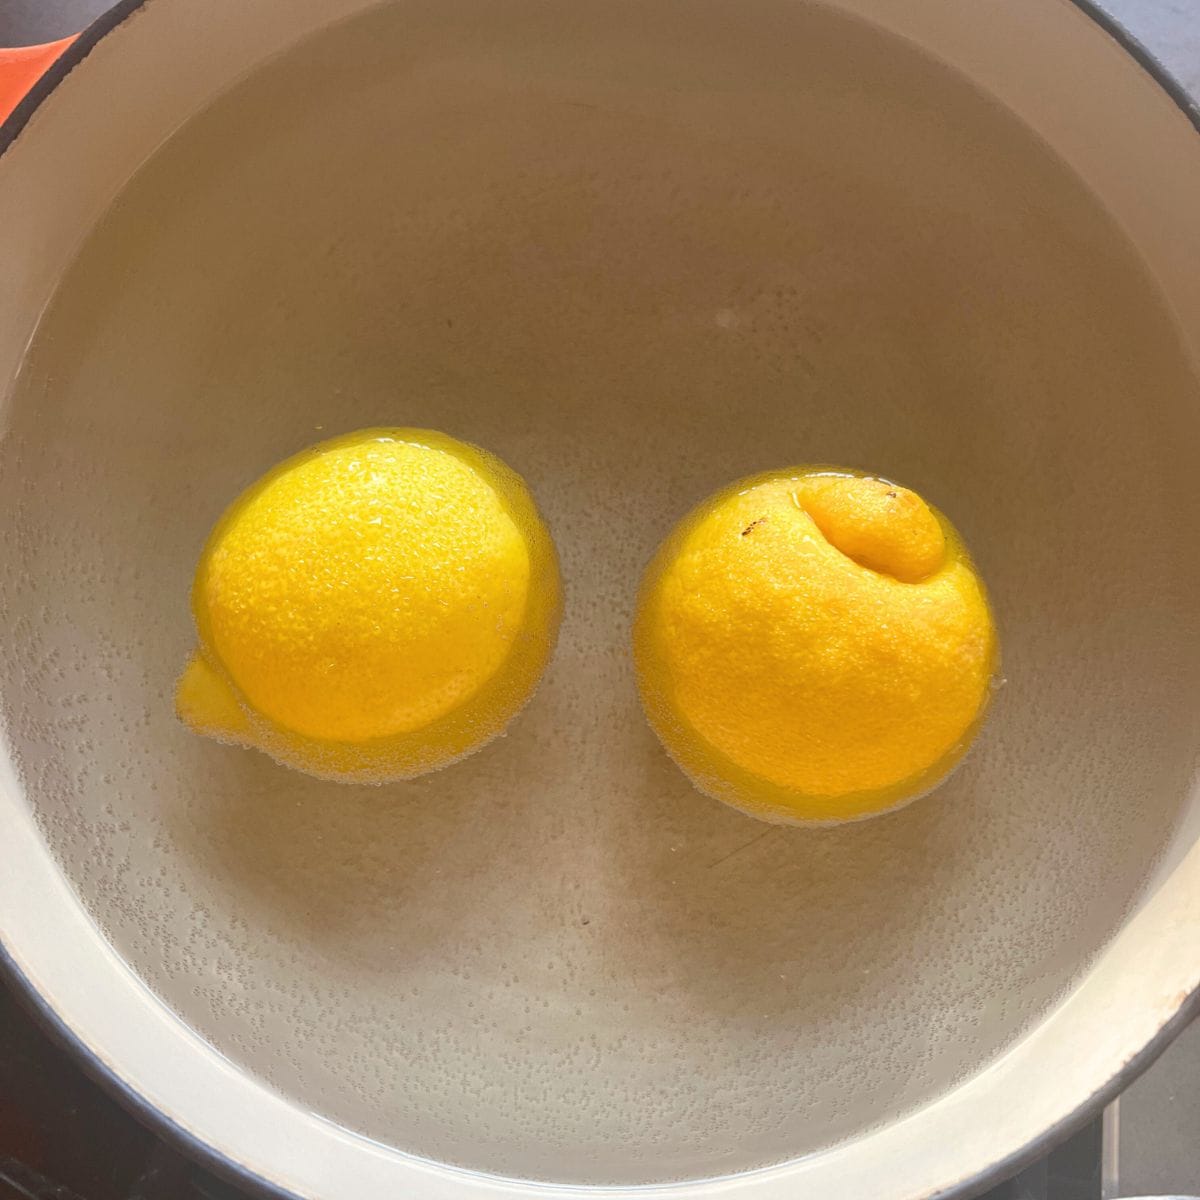 Boiling two lemons in a pan filled with water.